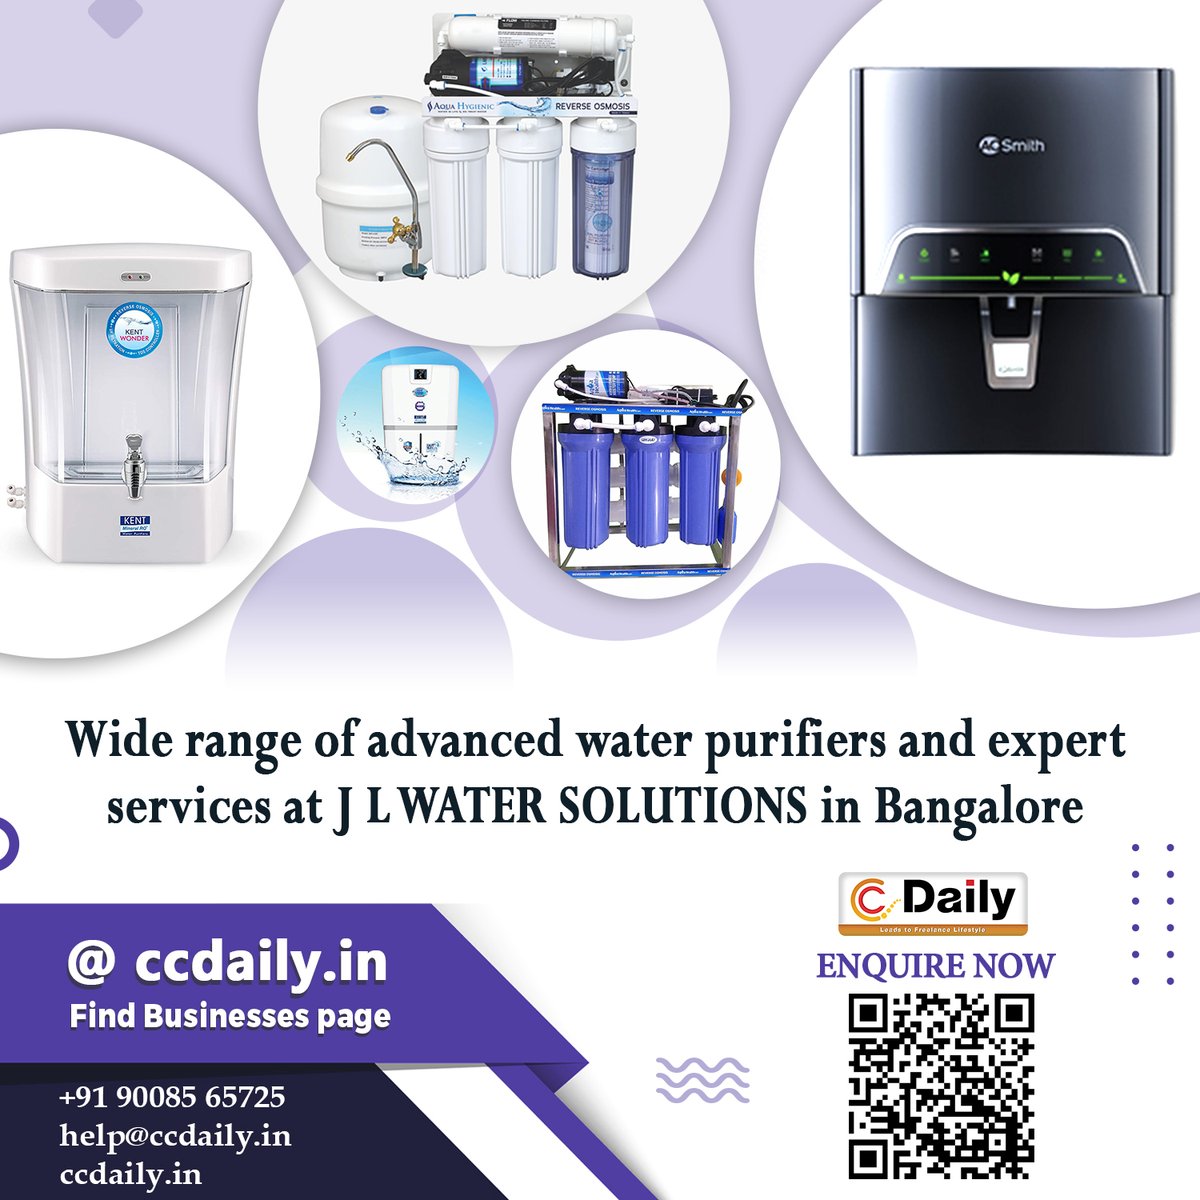 J L Water Solutions: Your trusted water purifier dealer in Bangalore, ensuring clean and safe drinking water.

#WaterPurifiers #WaterPurification #CleanWater #SafeDrinkingWater #Bangalore #WaterSolutions #WaterDealer #WaterPurifierDealer #WaterServices #WaterInstallation